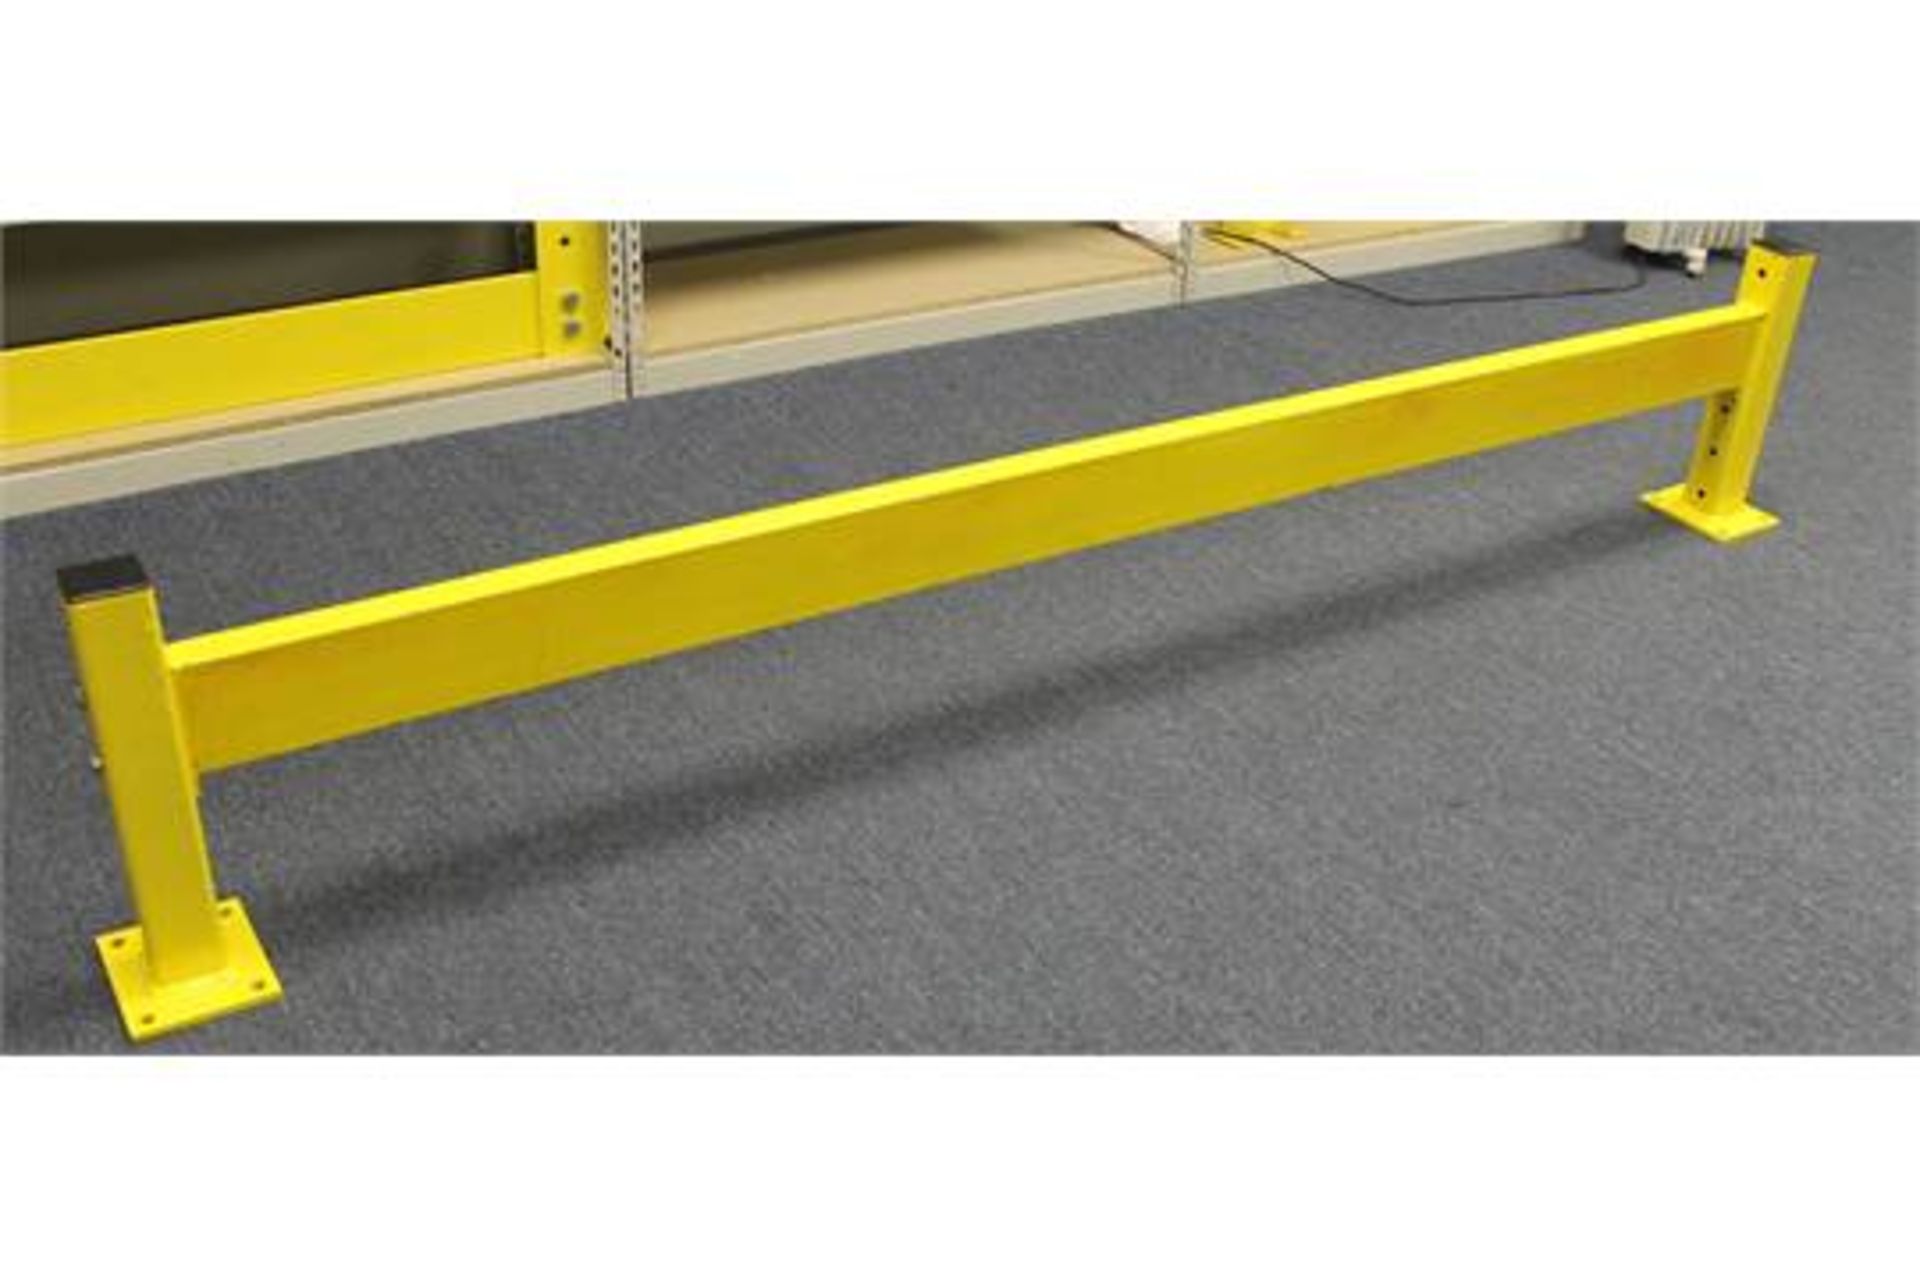 48.75 FT LONG AND 18" TALL GUARD RAIL,  OVERALL SIZE: 100"W X 5"T X 2"D, INCLUDES: 7 PCS OF